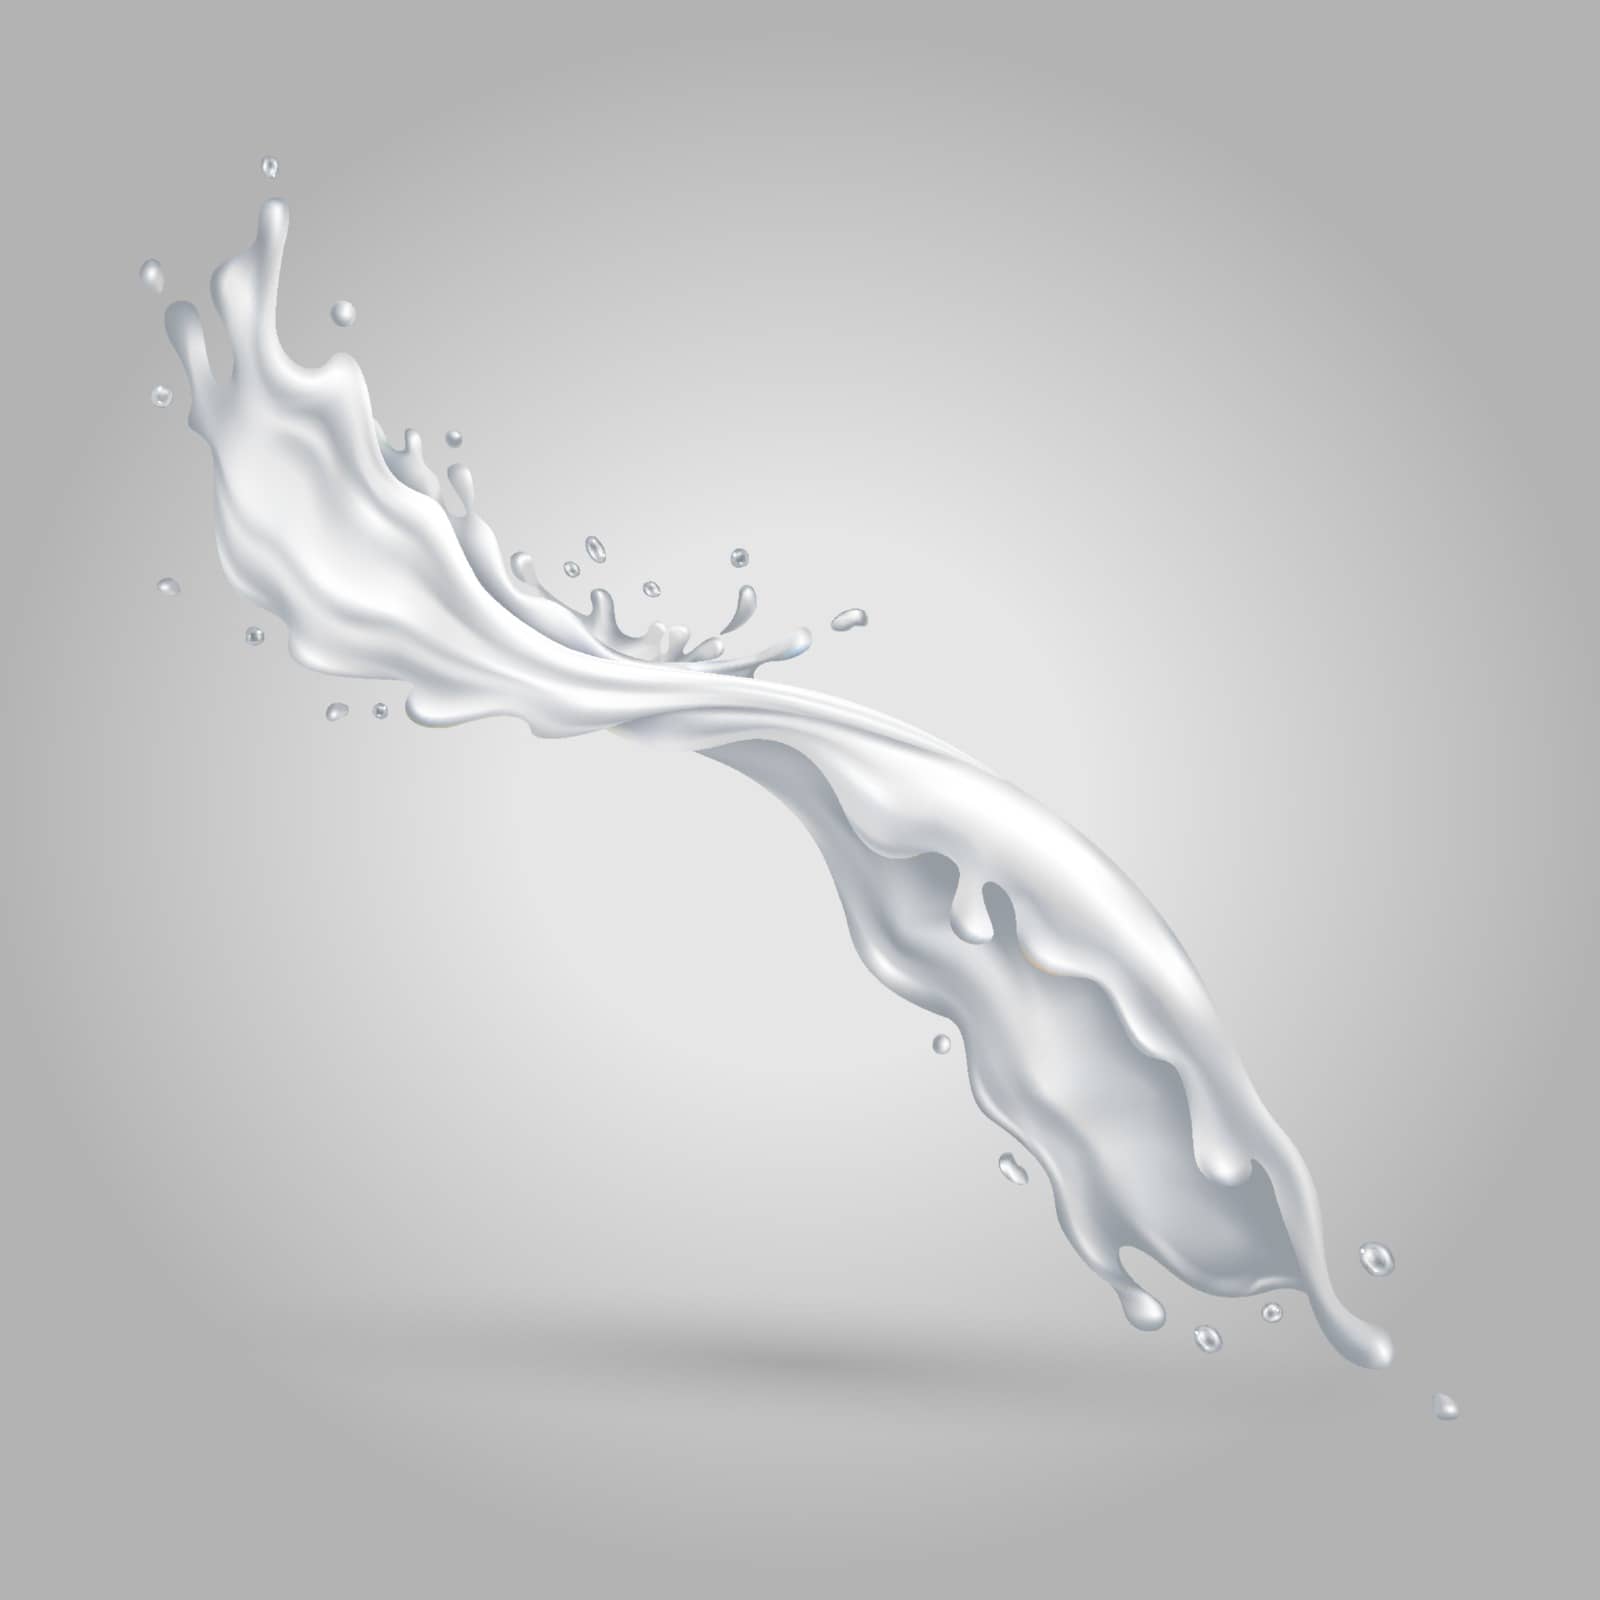 Milky liquid splash on a gray background by ConceptCafe